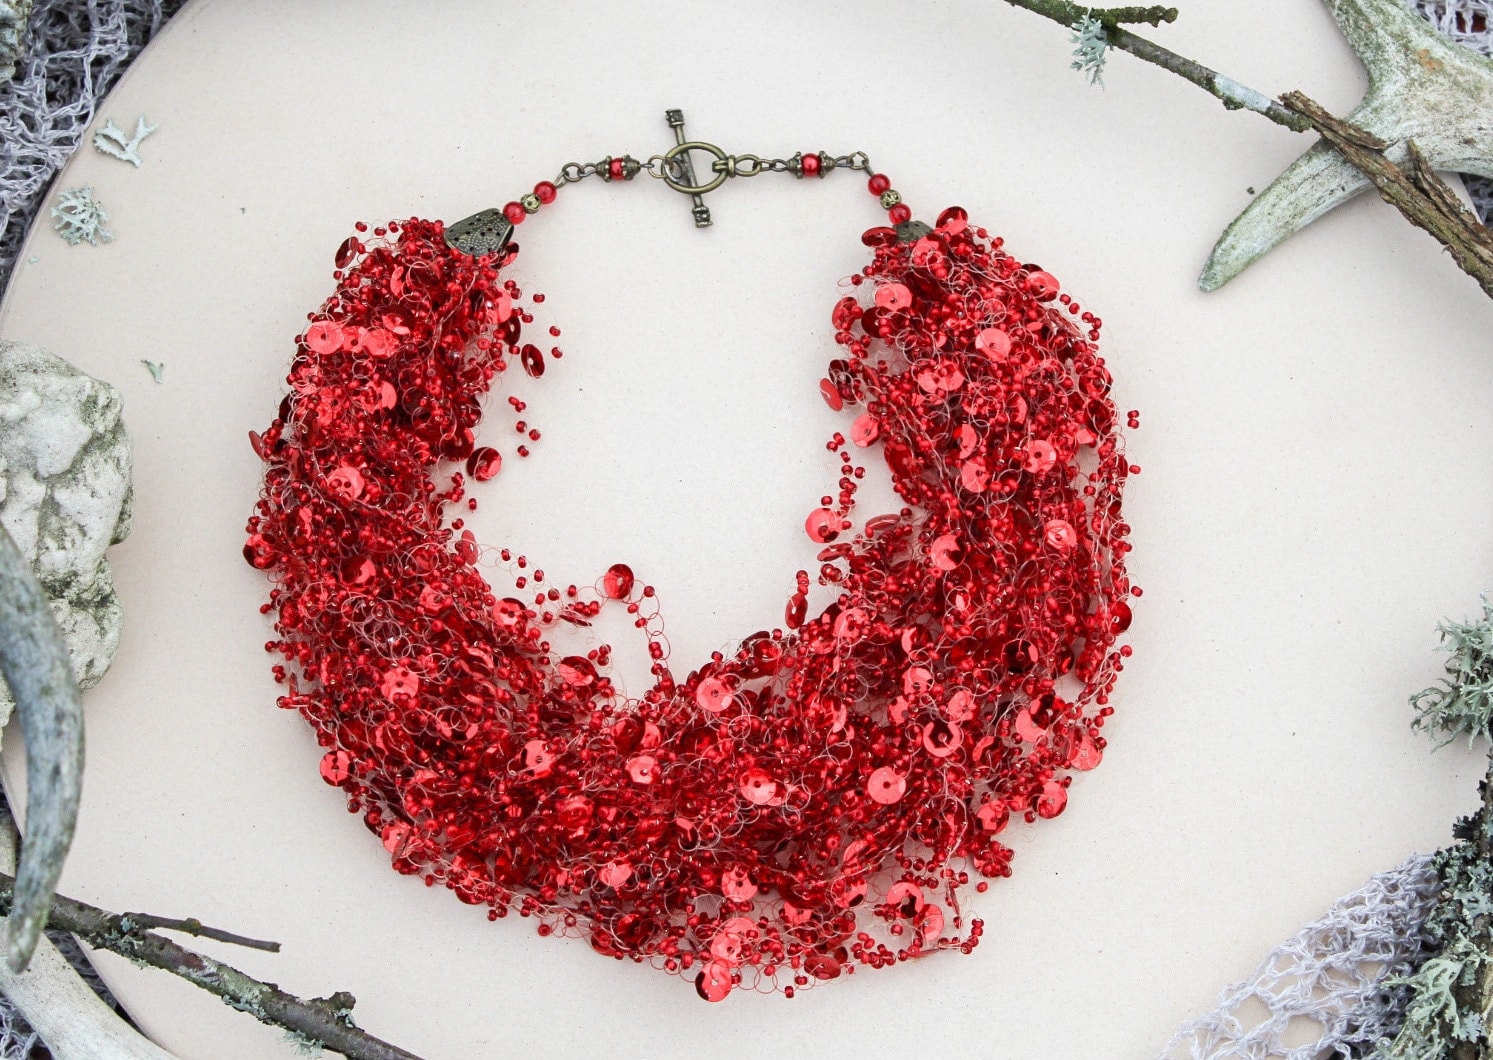 Red Sequin Necklace, Bright Necklace, Multistrand Elastic Necklace,  Flexible Jewelry, Bib Necklace, Statement Thick Necklace, Gift for Her -  Etsy